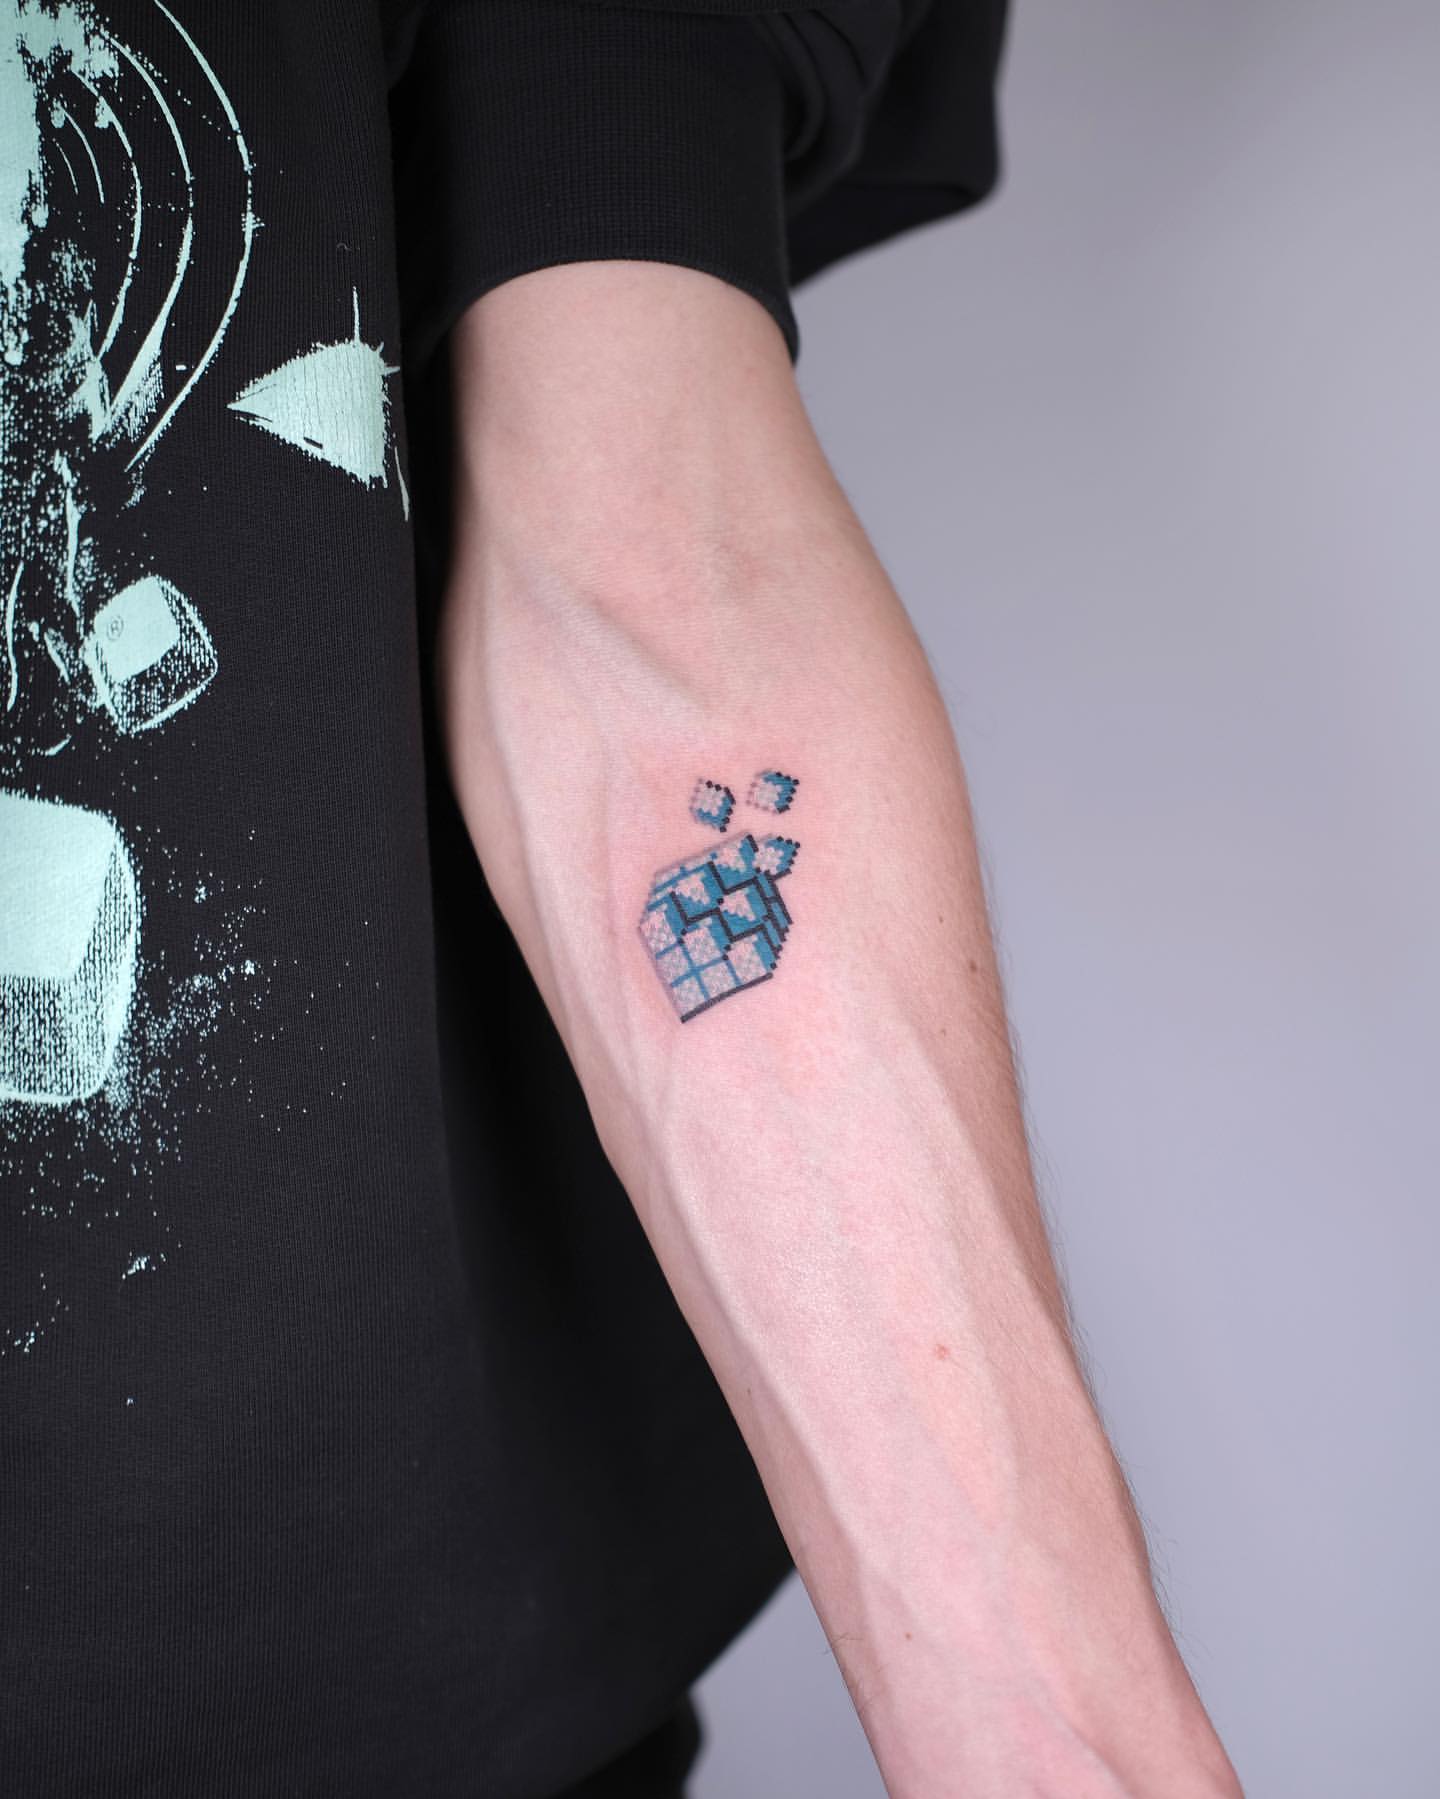 Small Tattoos for Men 7